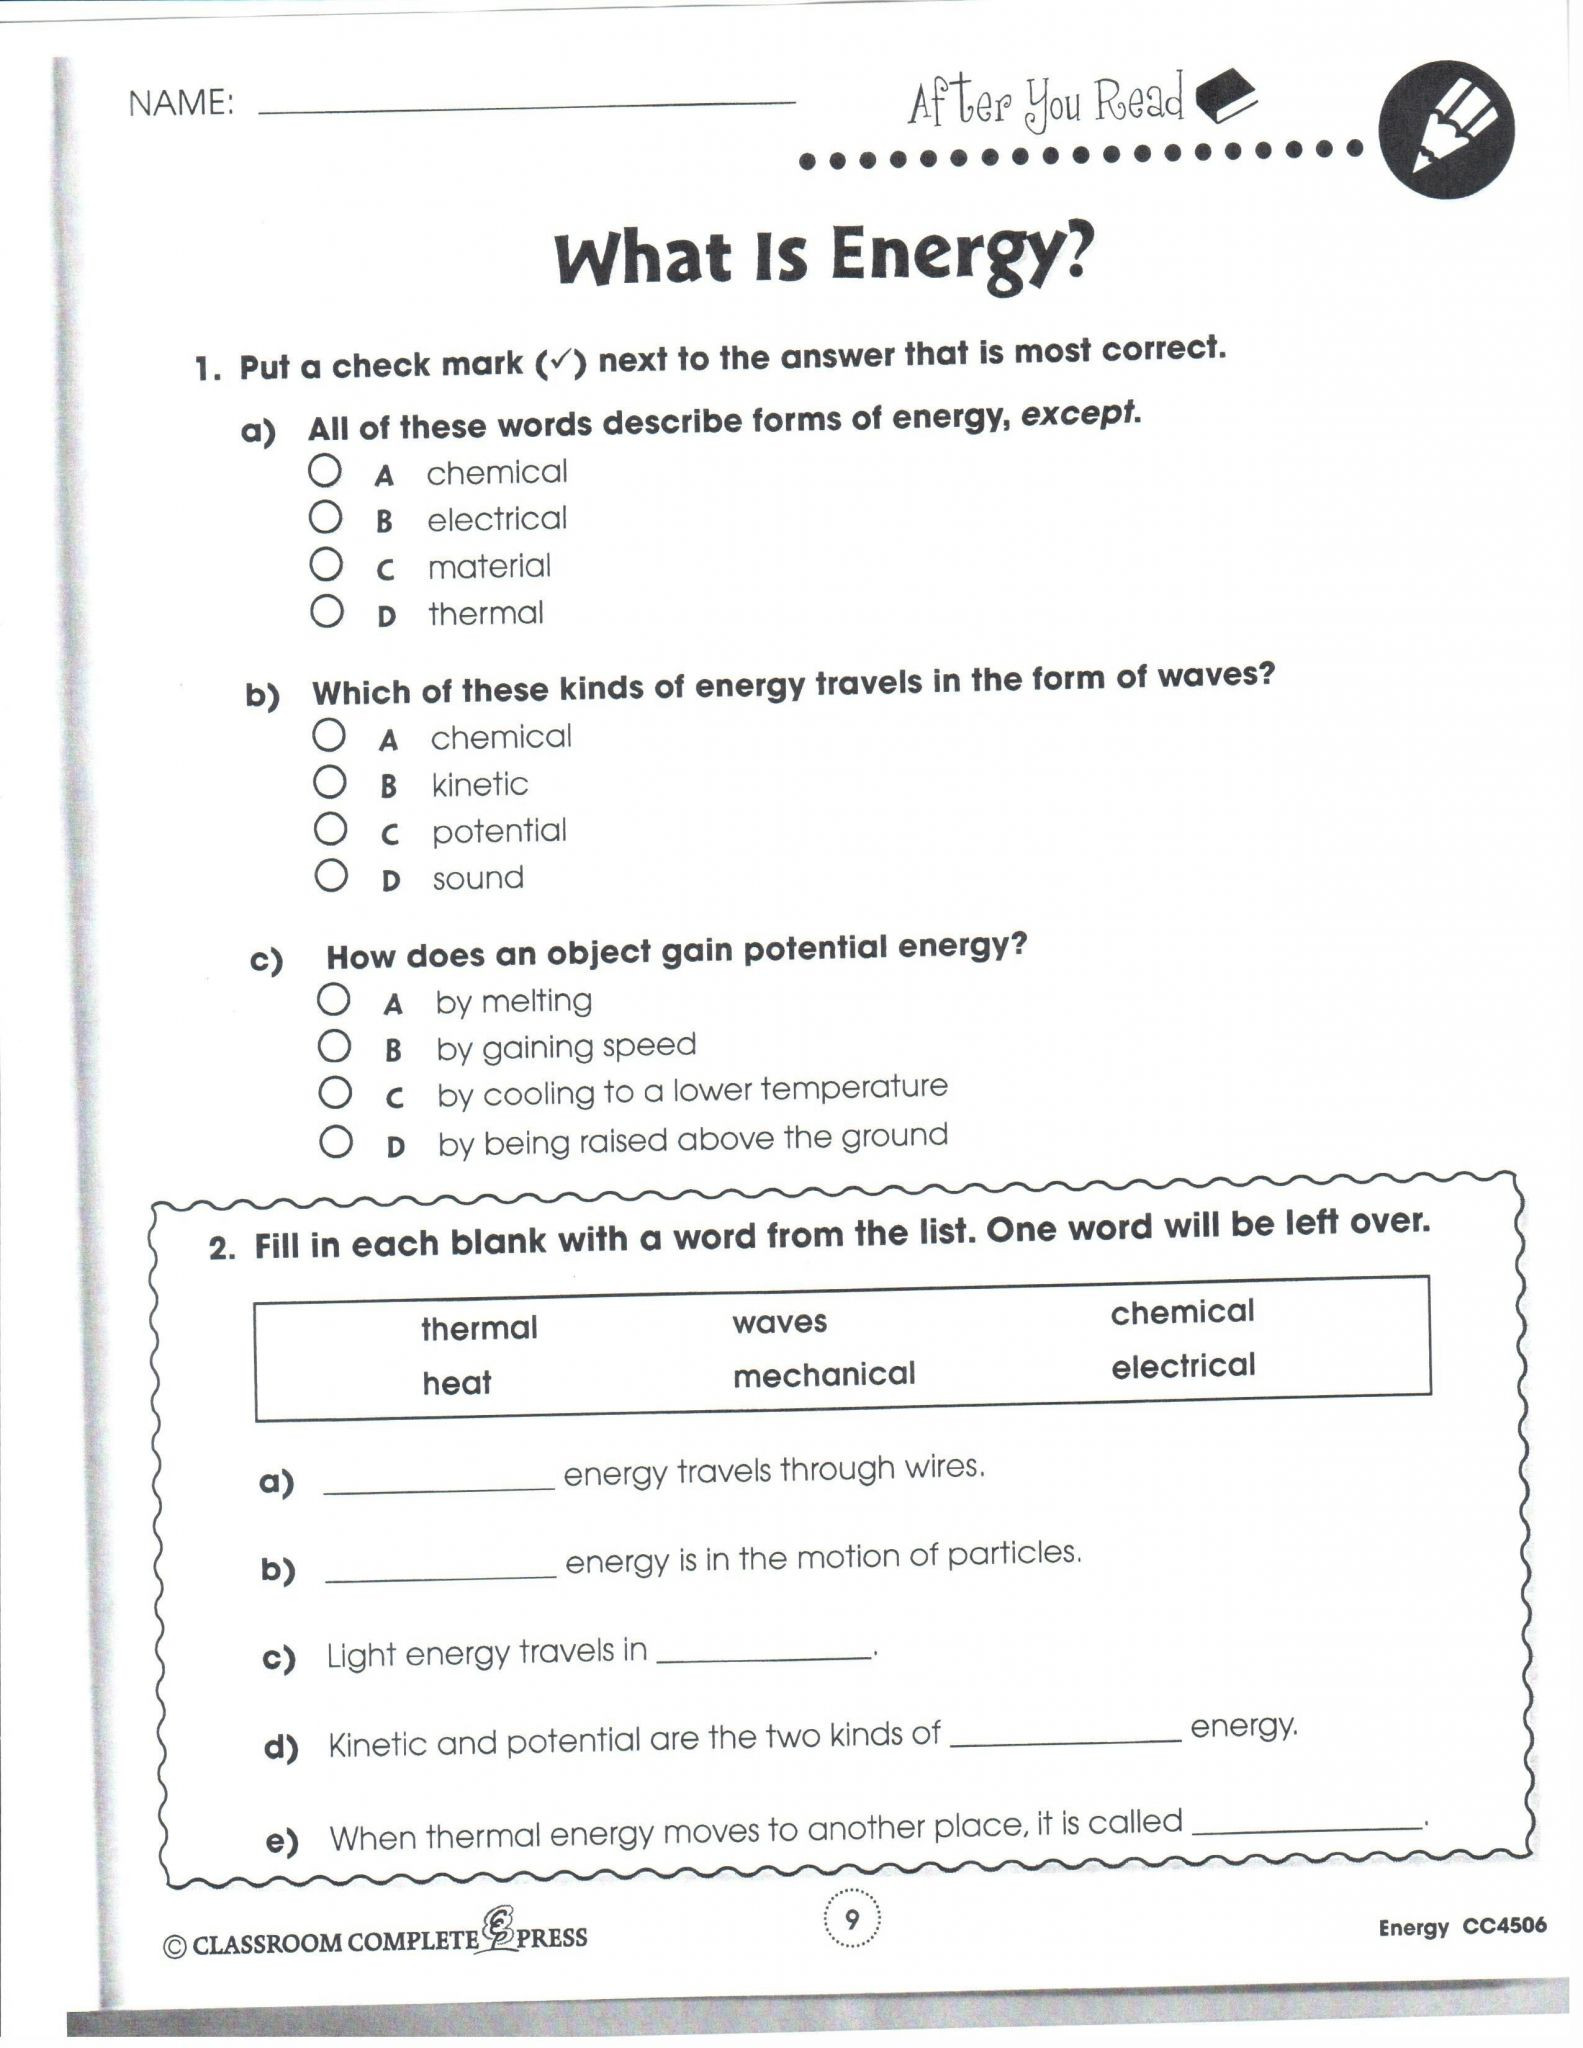 Significant Figures Worksheet Answers Science Worksheets for Grade Printable with Answers